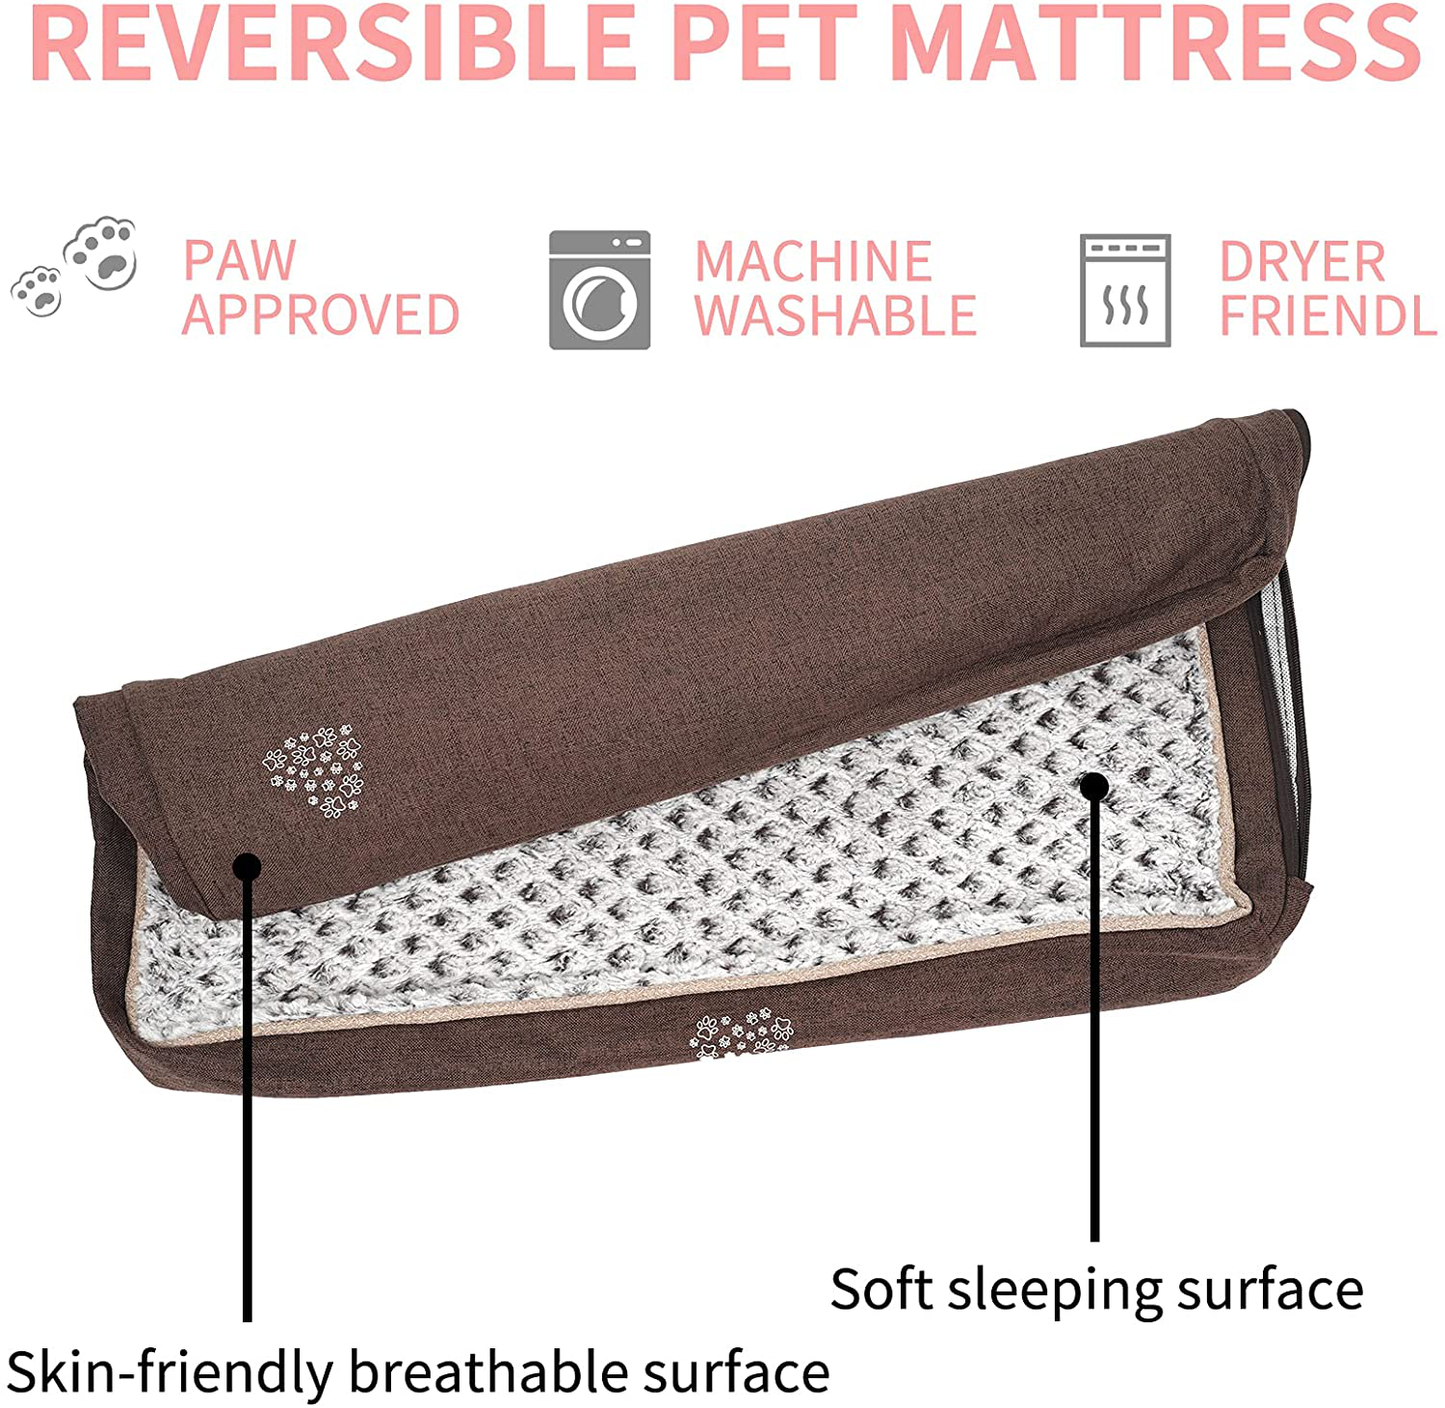 VANKEAN Stylish Reversible Dog Mat (Warm and Cool), Waterproof Inner Lining, Removable Machine Washable Cover, Plush Dog Mattress for Joint Relief Dog Bed for Crate, Coffee